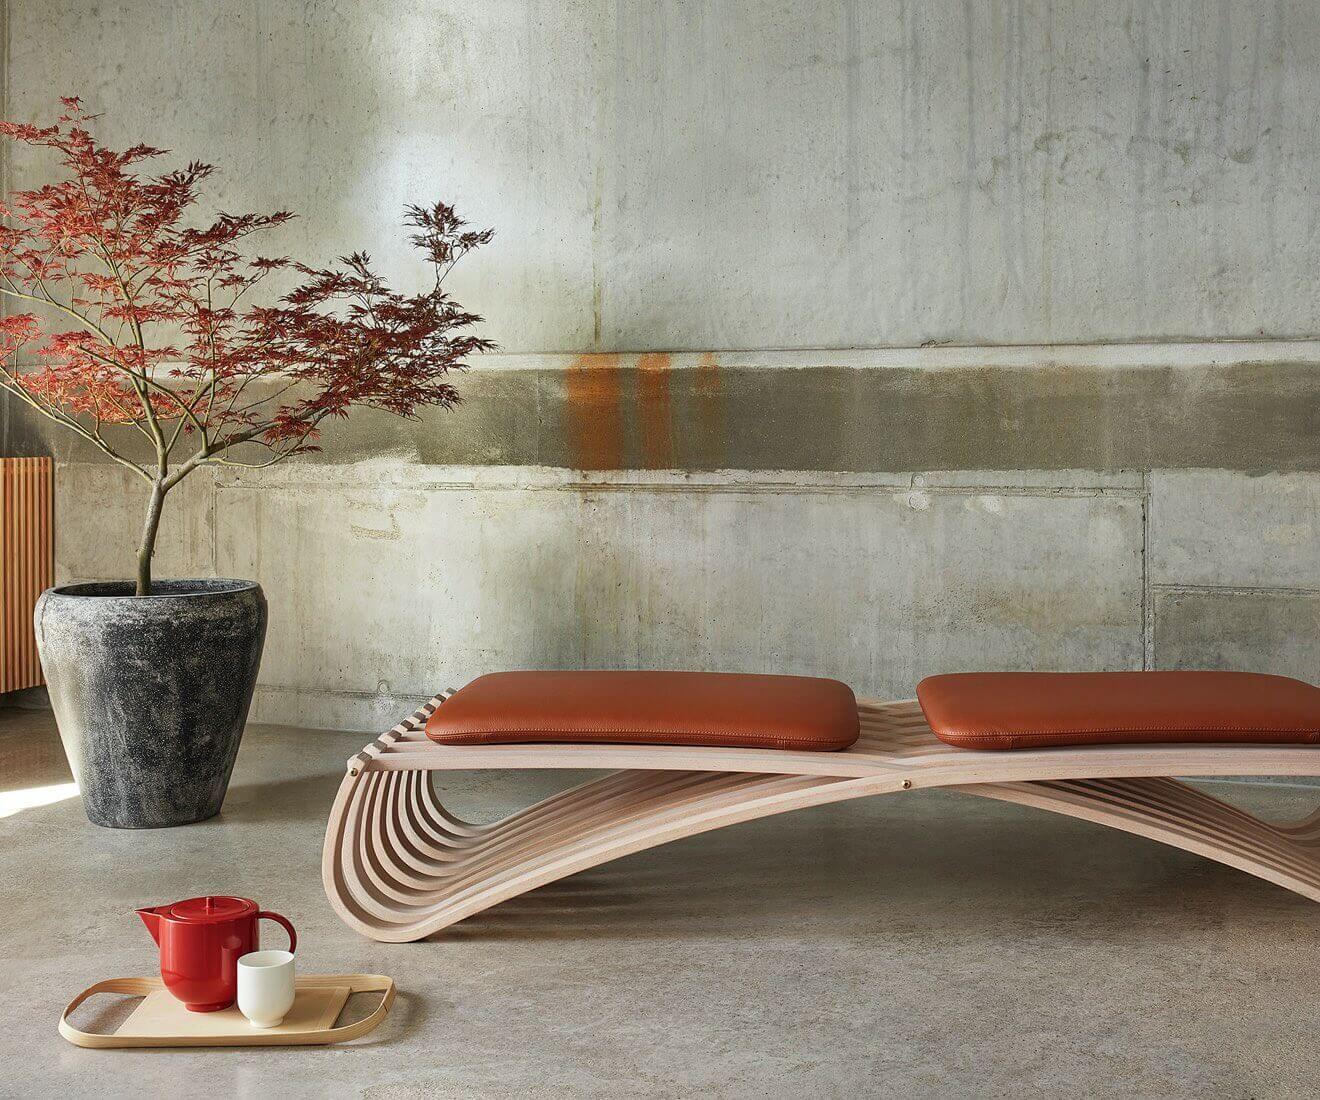 Introducing our JUNDO daybed with beech painted wood base and 3 cushions in cognac Optimo leather from Sorensen.

Jundo is Japanese for purity, which is what the designer, Mads Emil Garde sought for with this poetic design. It is the examination of